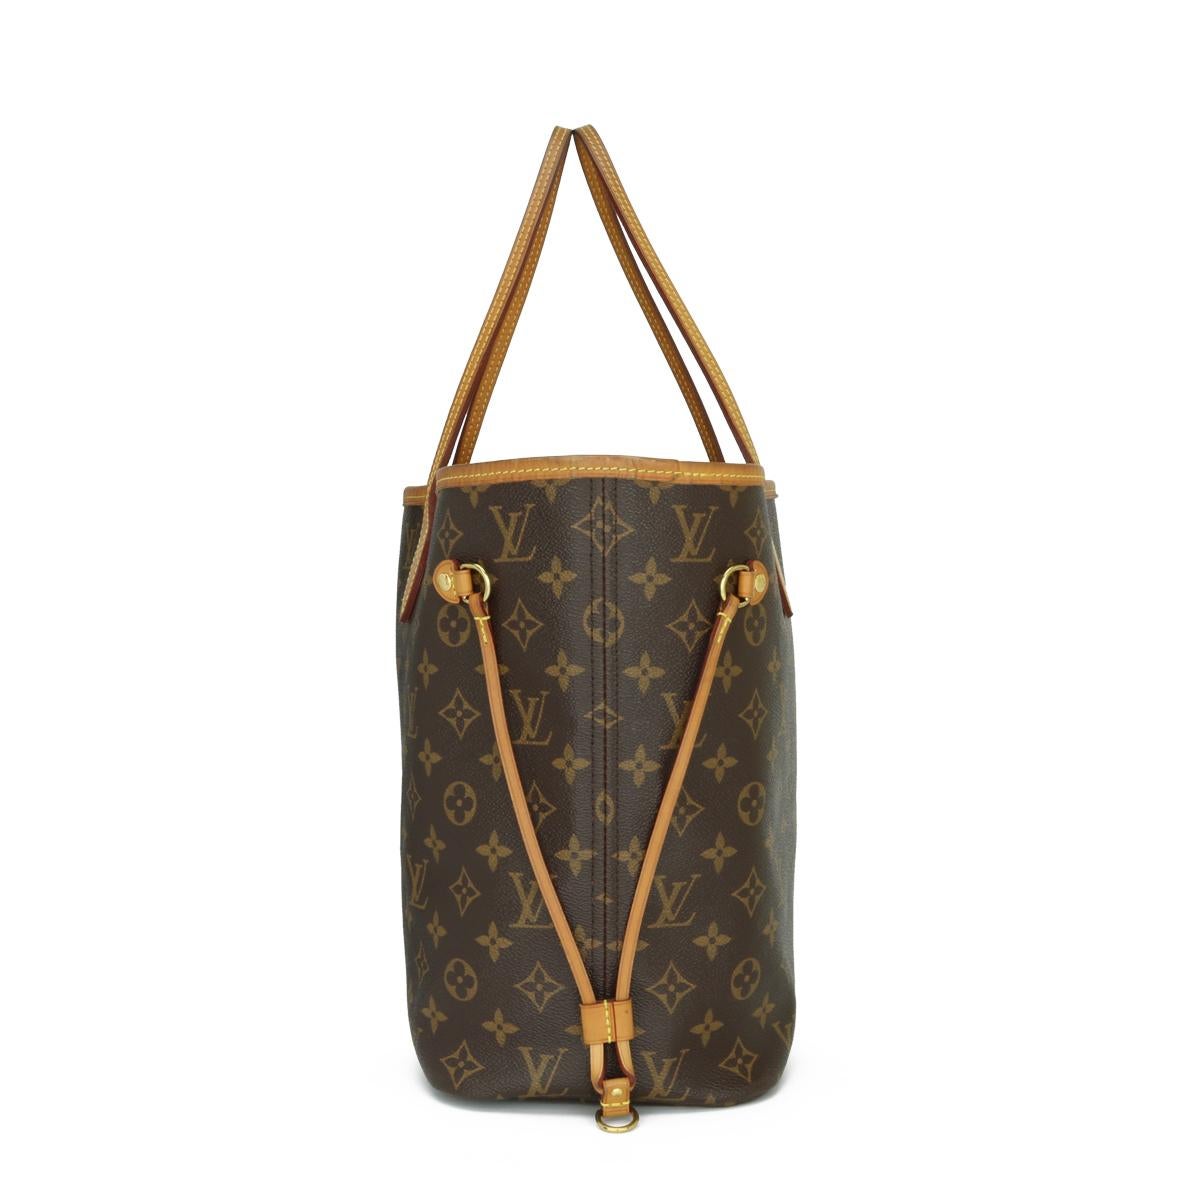 Louis Vuitton Neverfull MM Bag in Monogram with Cherry Red Interior 2019 In Good Condition For Sale In Huddersfield, GB